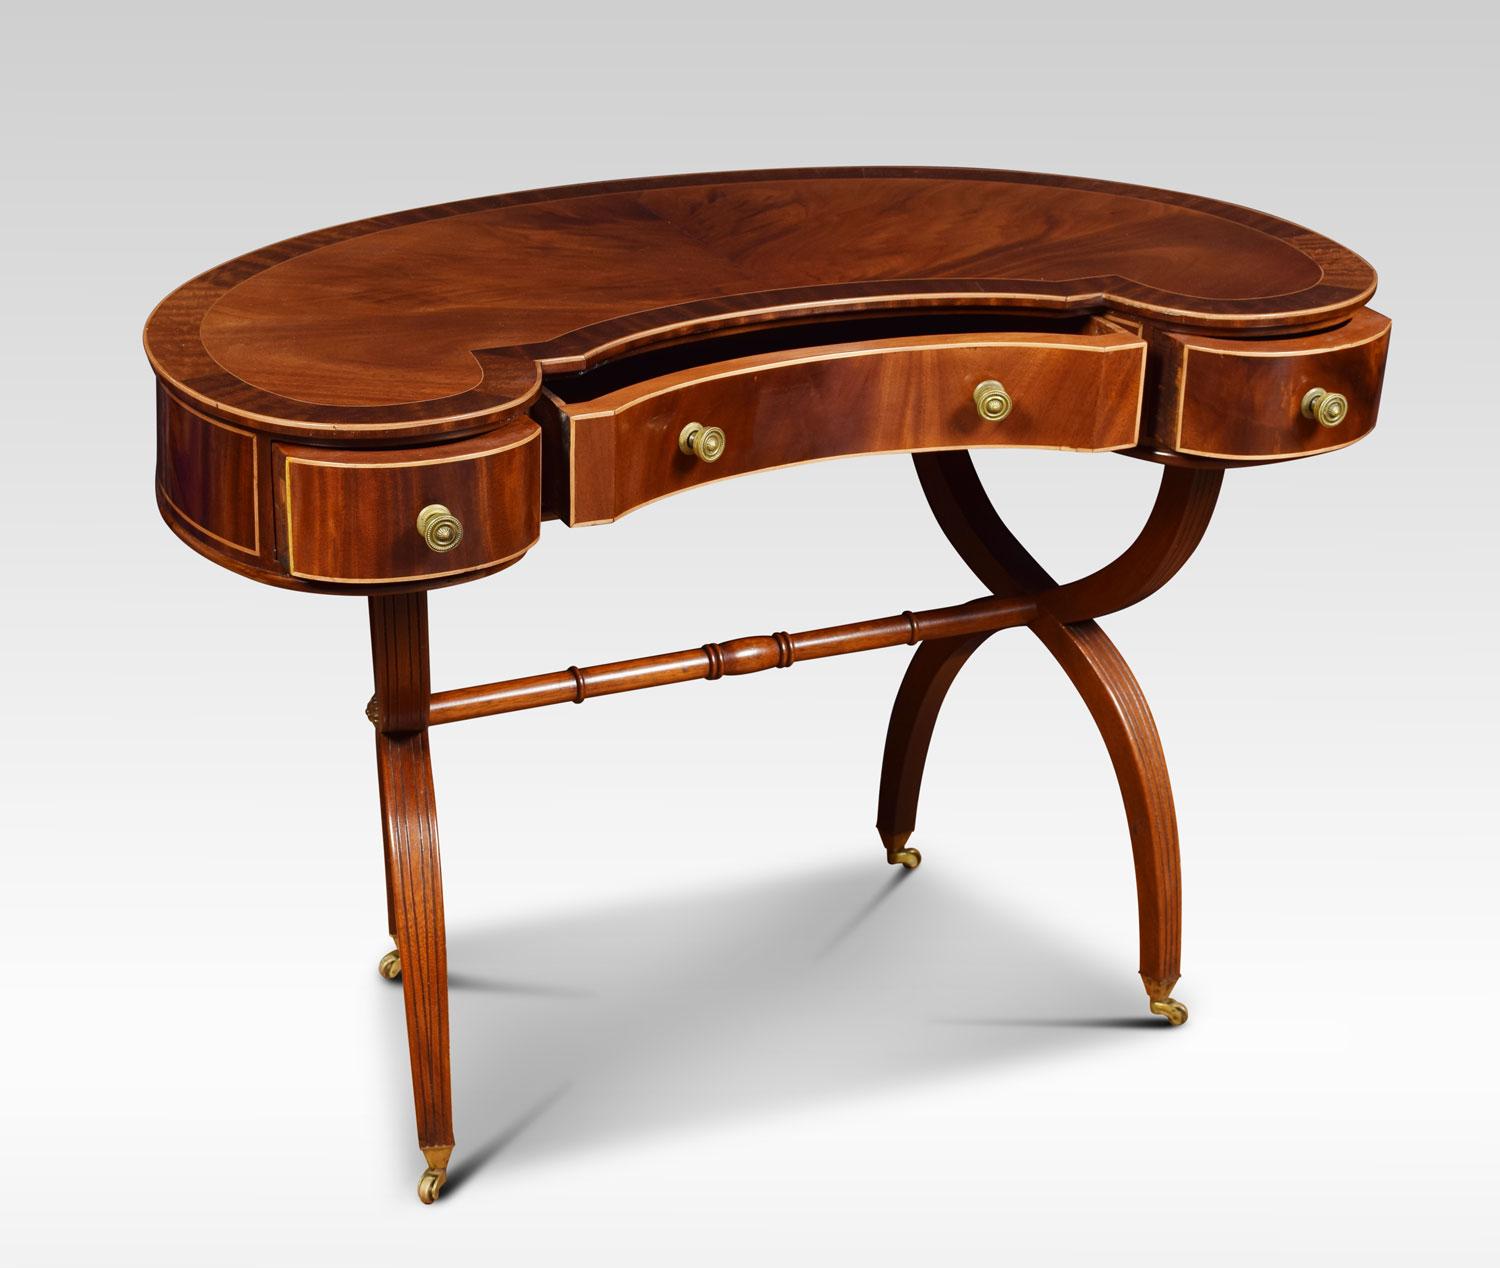 Mahogany ladies dressing table the kidney shaped crossbanded top, above three freeze drawers. Raised on 'X' shaped supports terminating in brass castors
Dimensions:
Height 28 inches
Width 39.5 inches
Depth 23 inches.